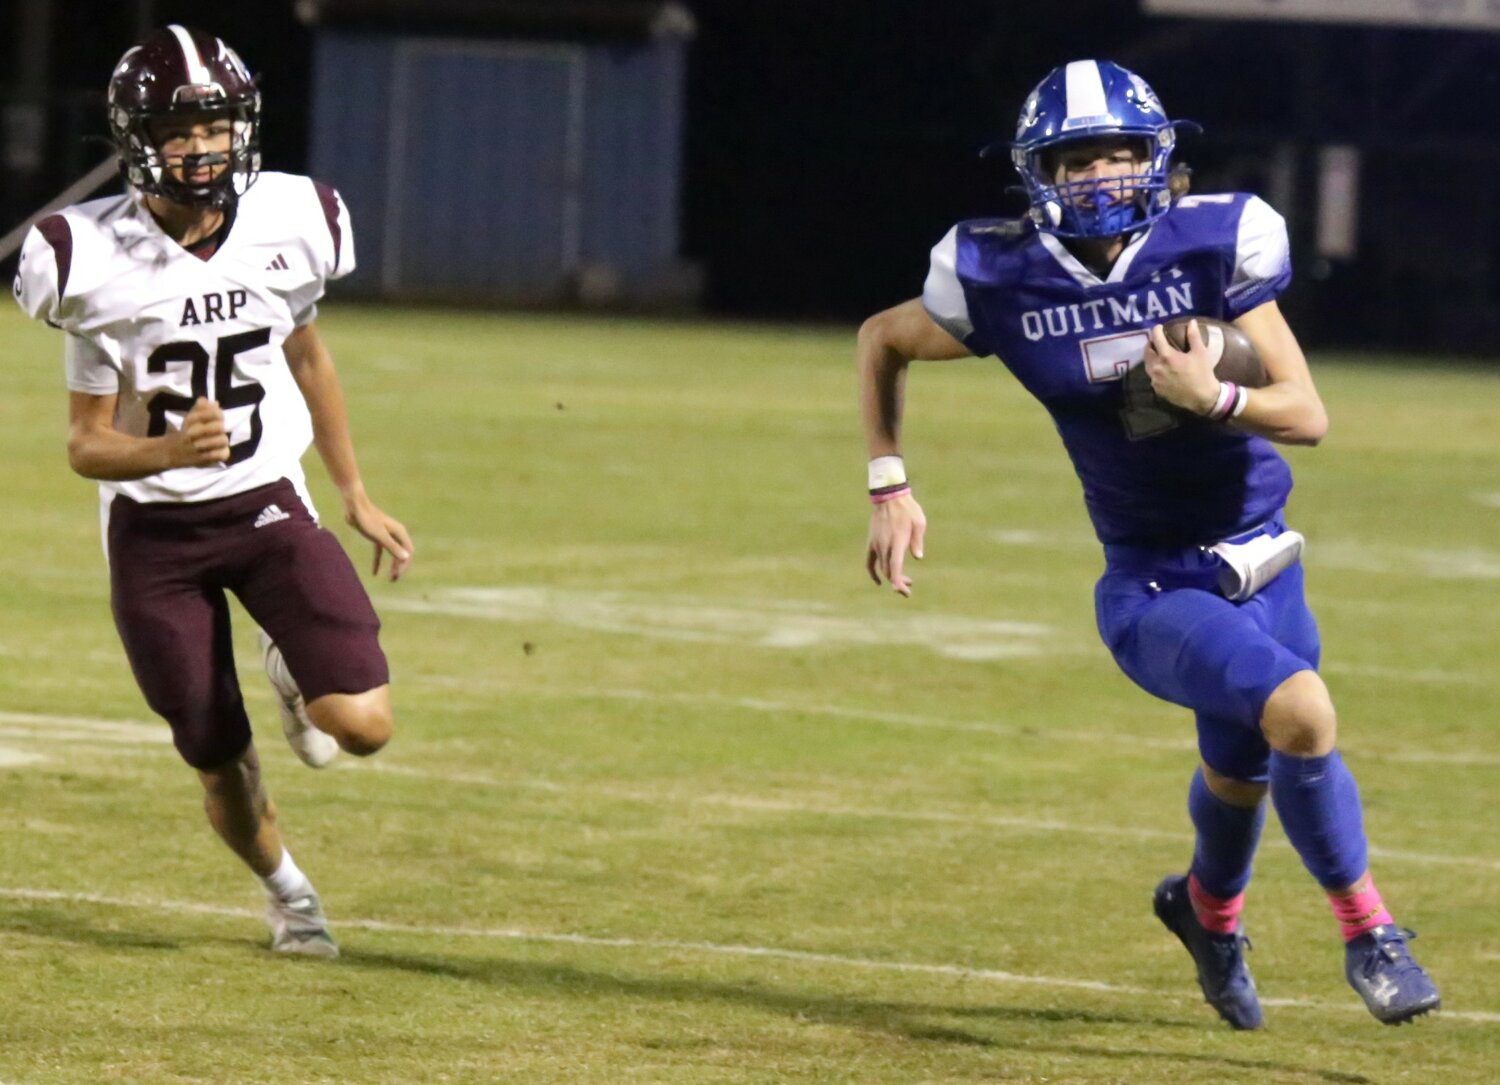 Carter Smith gains the corner on a kick-off return against Arp.